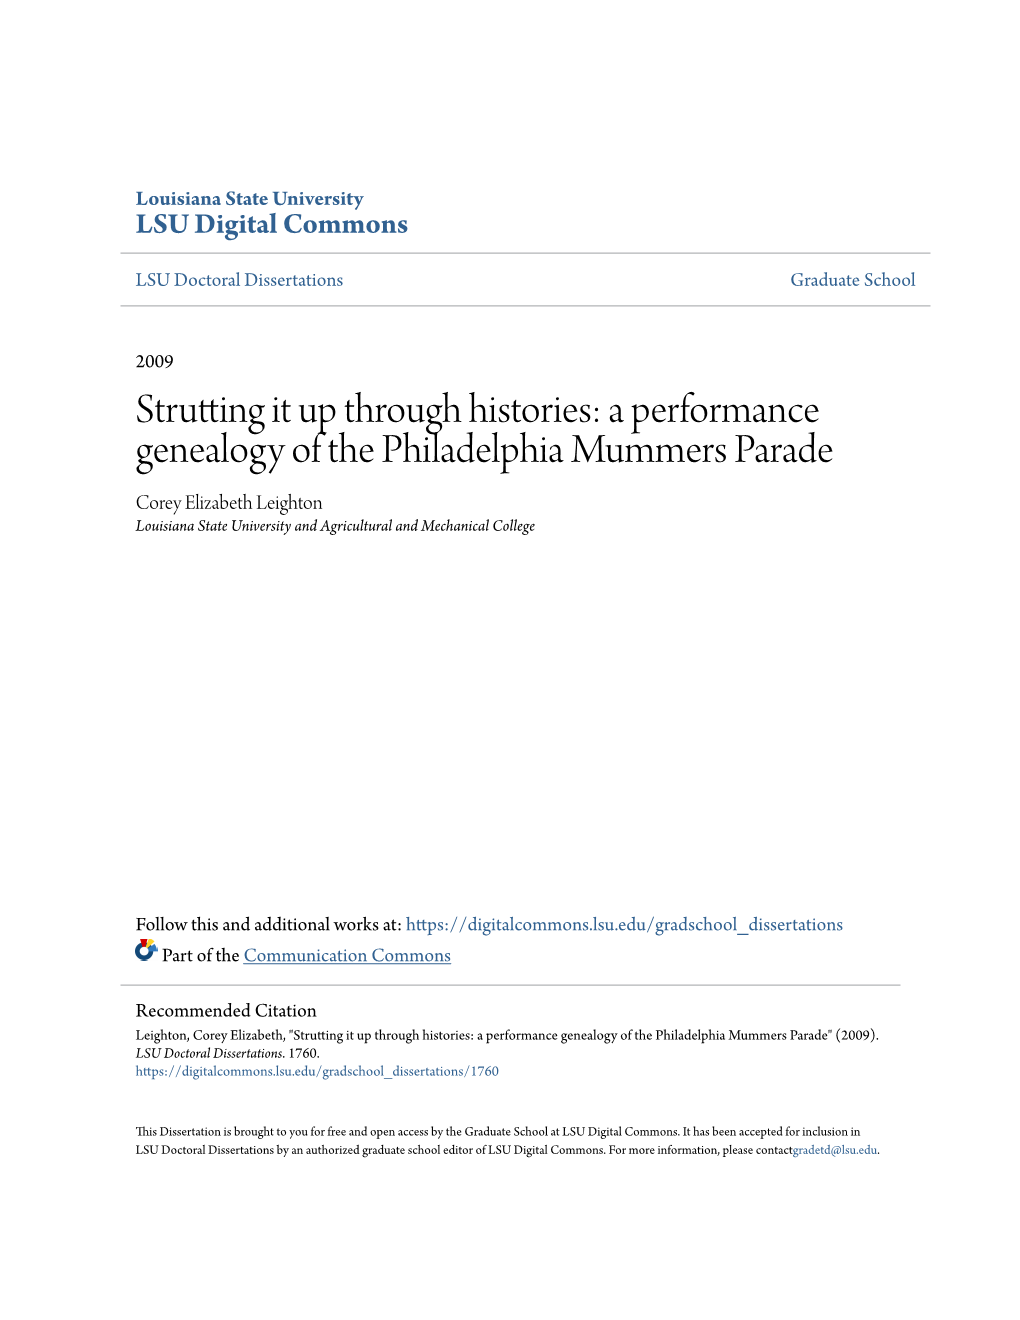 A Performance Genealogy of the Philadelphia Mummers Parade Corey Elizabeth Leighton Louisiana State University and Agricultural and Mechanical College